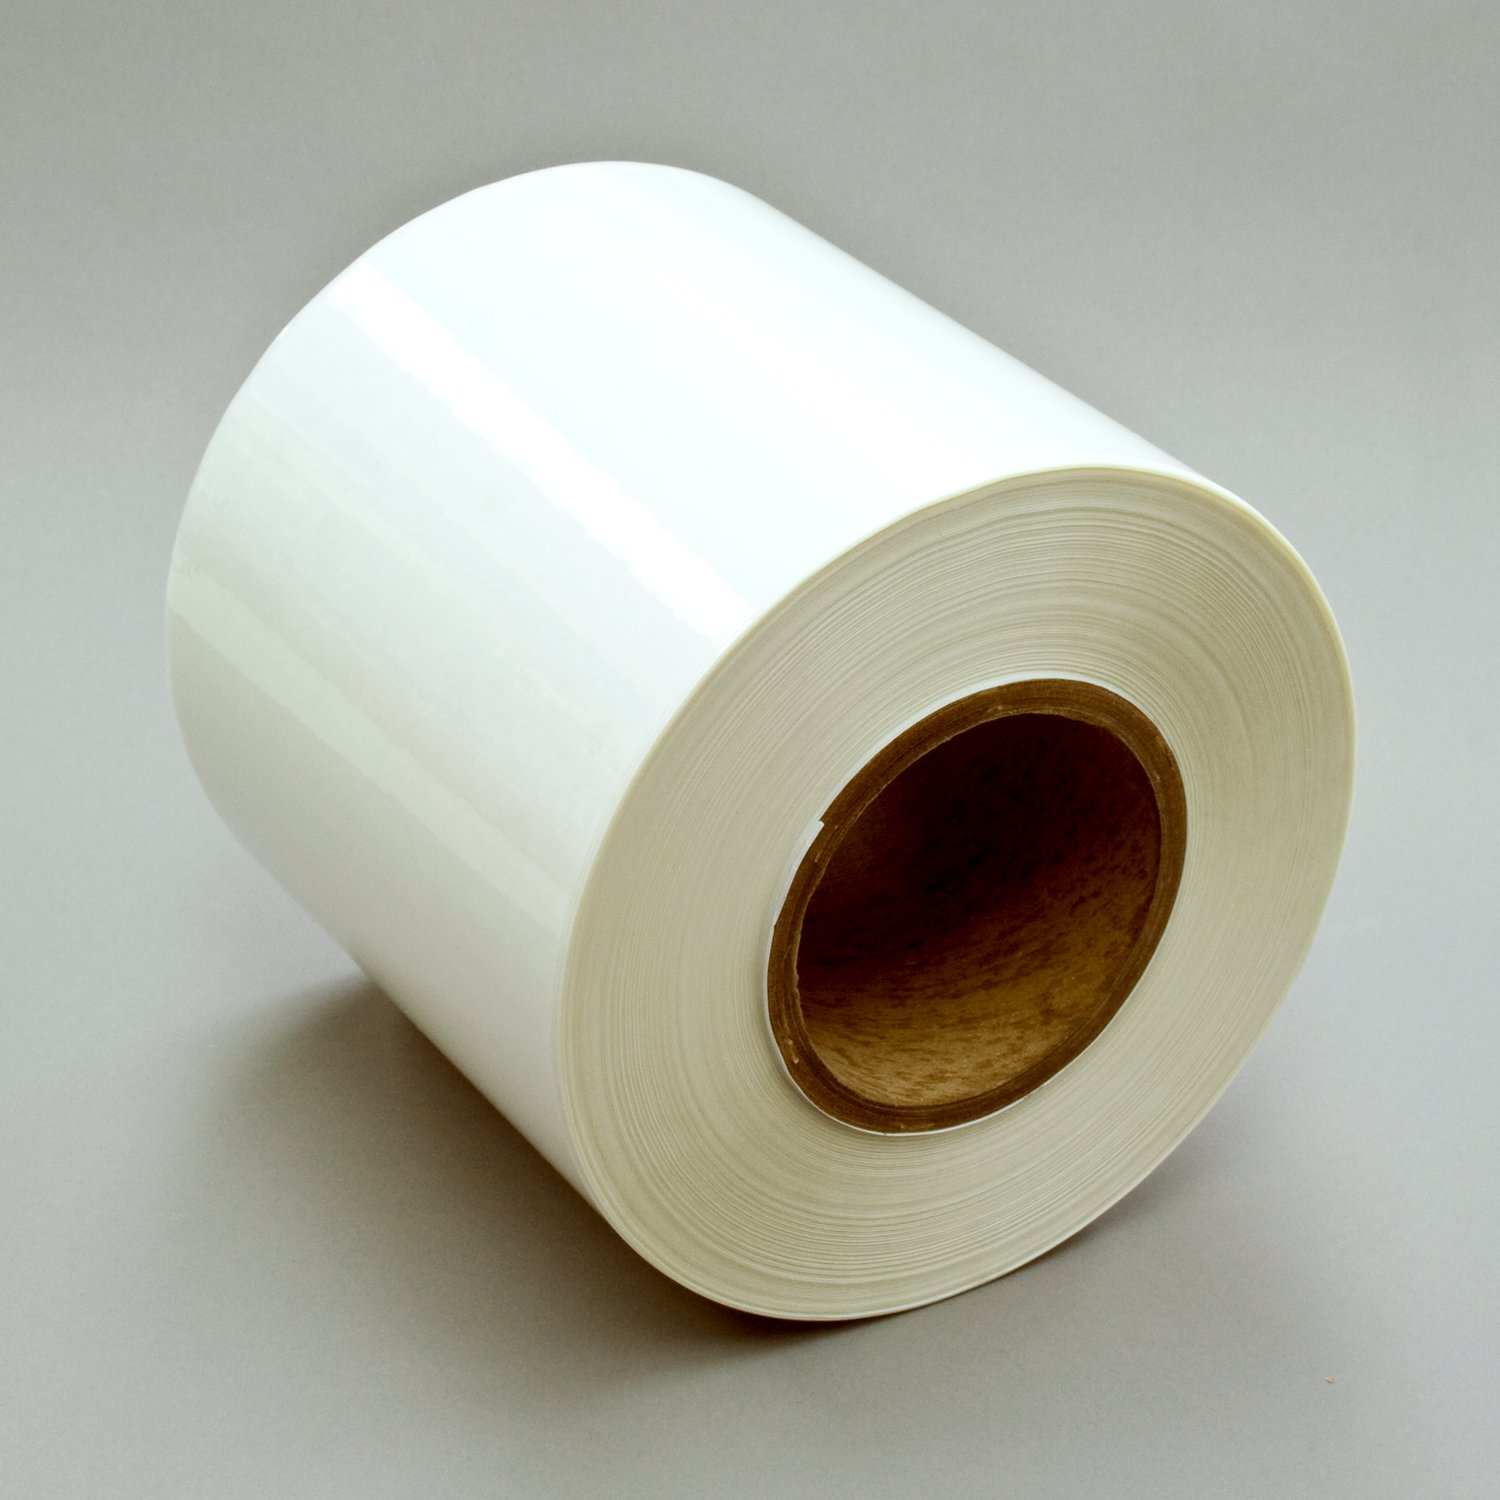 7000122369 - 3M Thermal Transfer Label Material 7876, Clear Polyester Gloss, 4.5 in
x 1668 ft, 1 Roll/Case